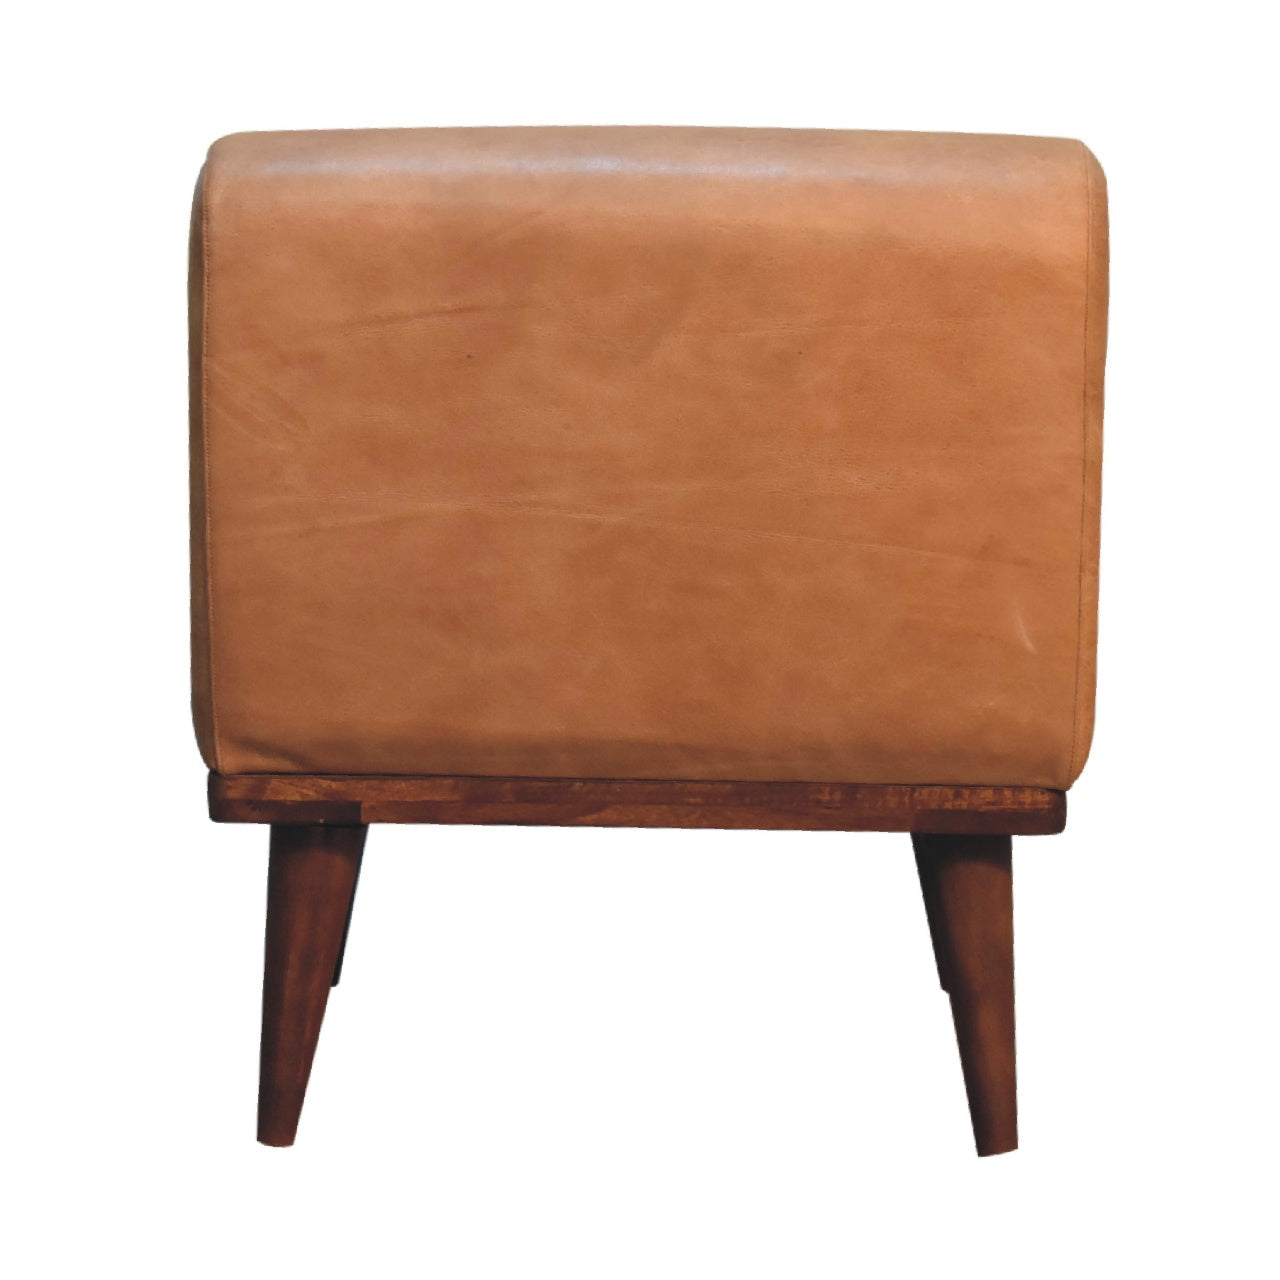 Tan Buffalo Leather  Footstool with Backrest